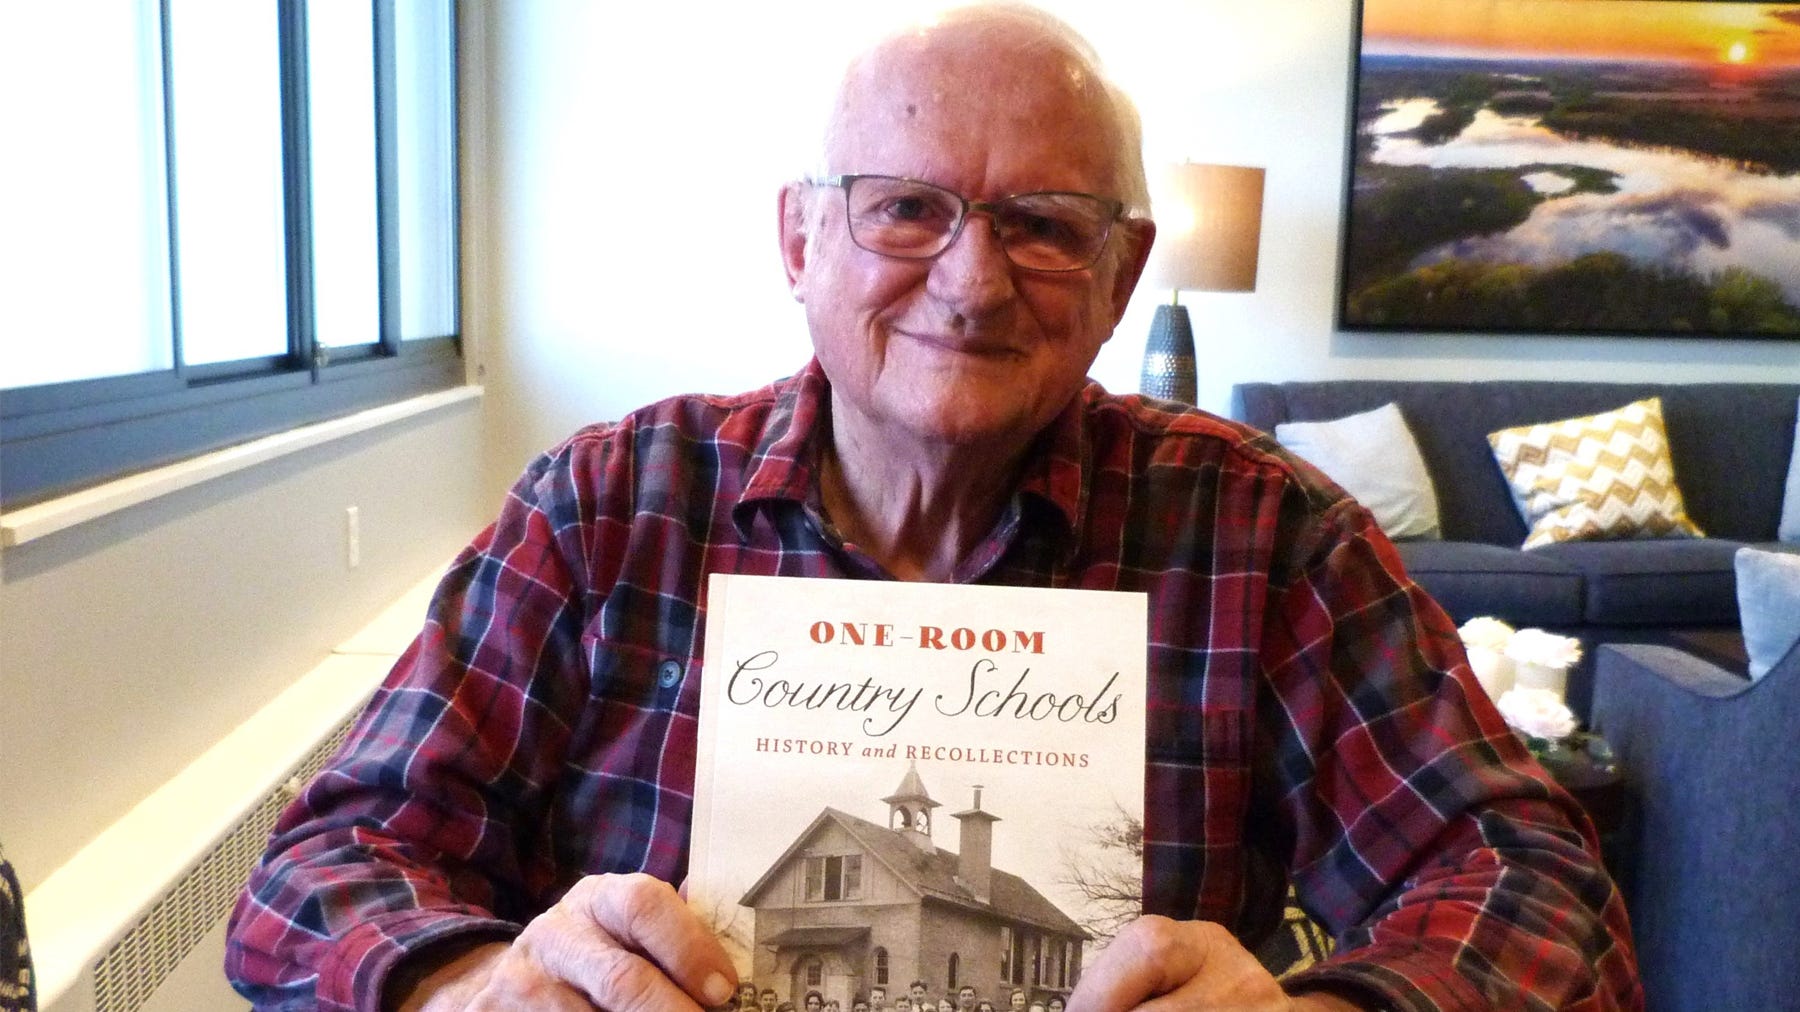 Jerry Apps holding book about one-room country schools